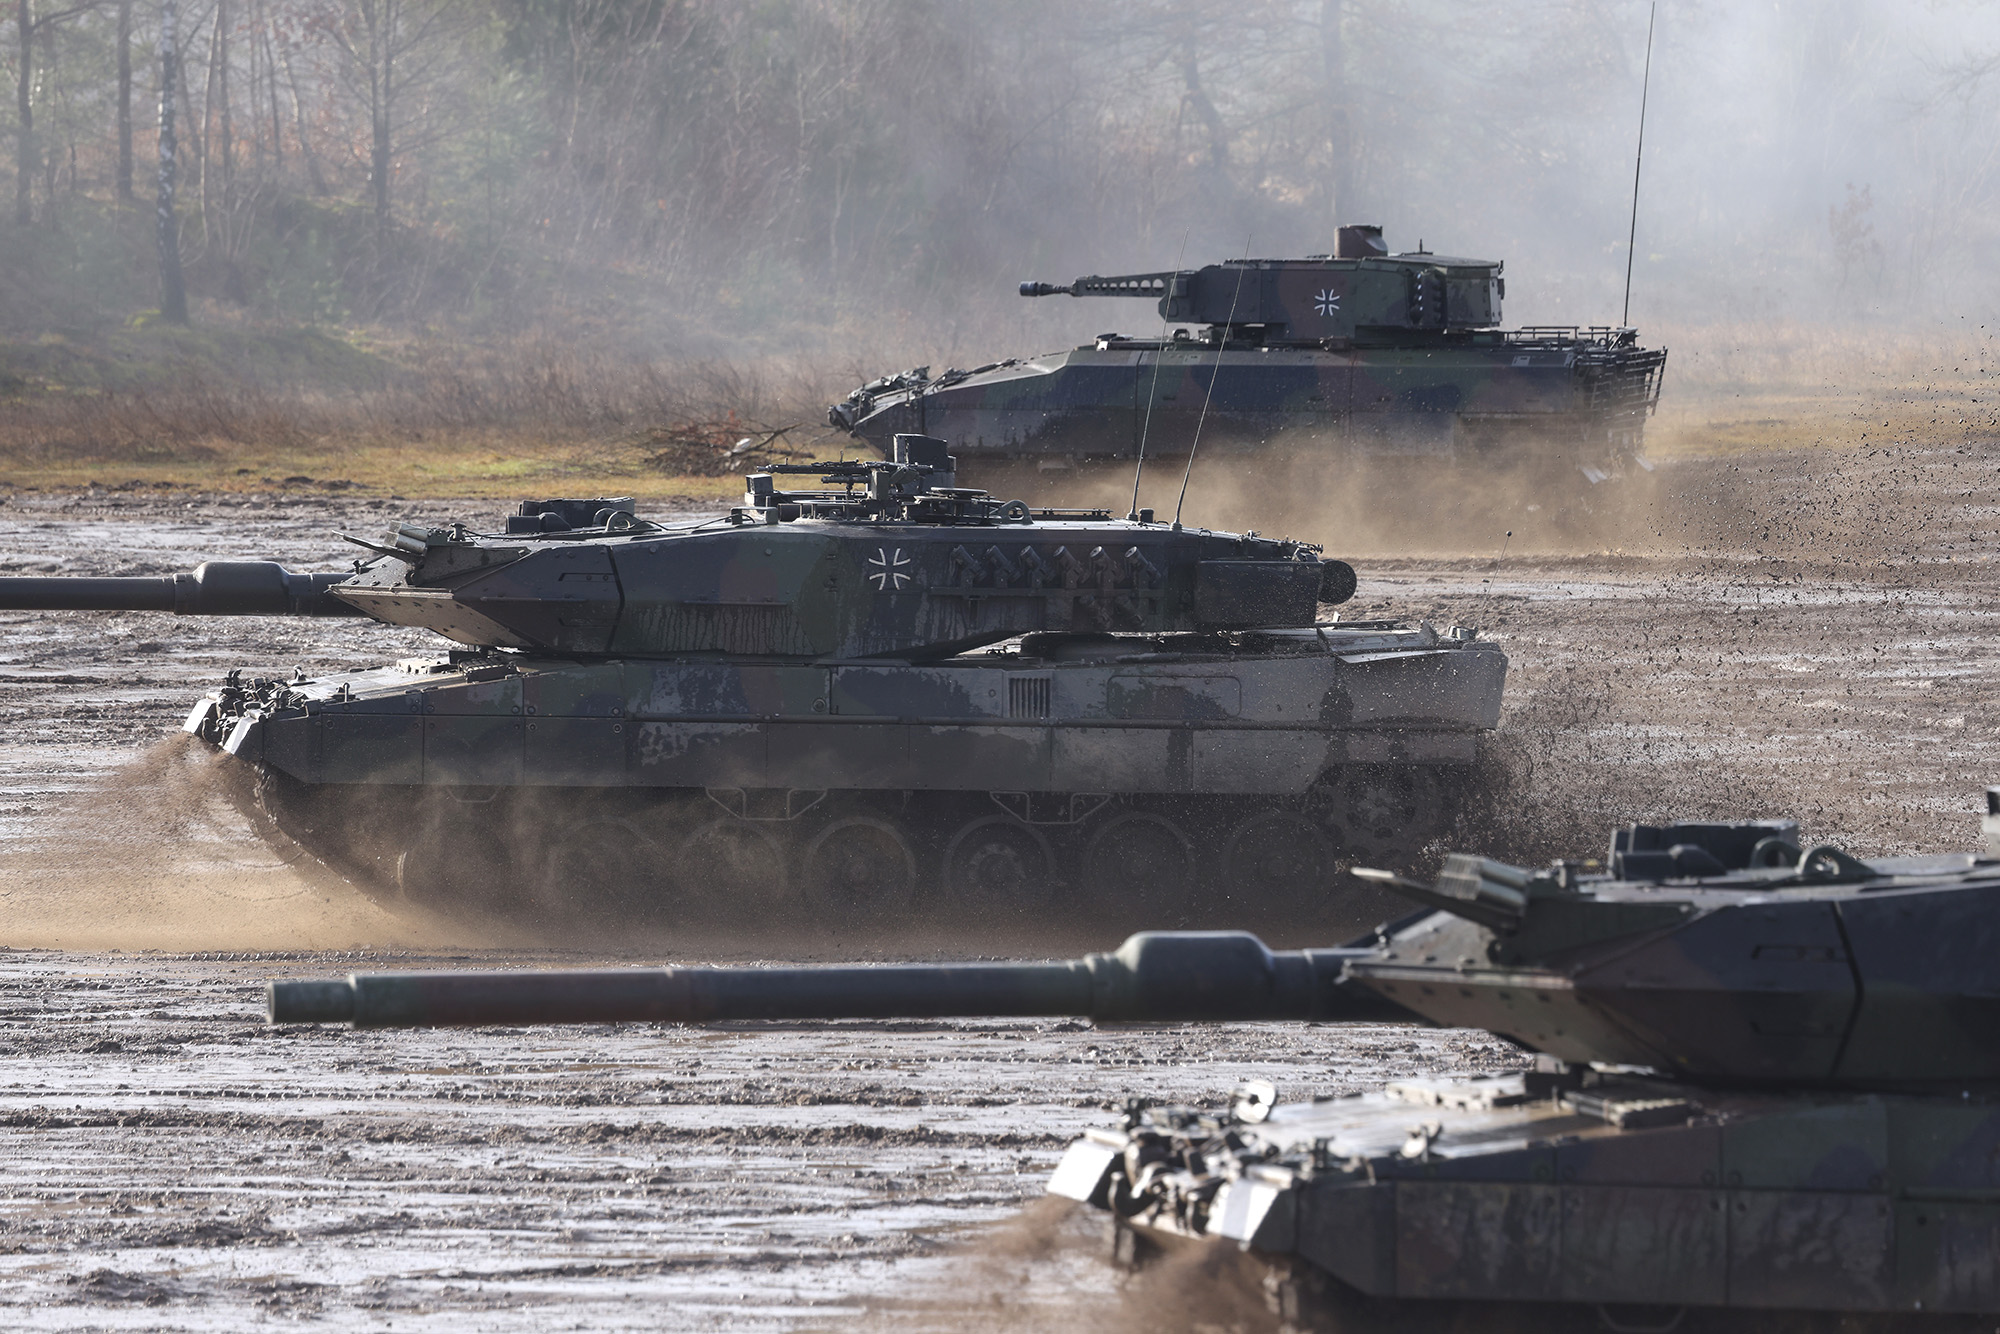 Two Leopard 2 A6 heavy battle tanks and a Puma infantry fighting vehicle of the Bundeswehr's 9th Panzer Training Brigade participate in a demonstration at the Bundeswehr Army training grounds on February 7, in Munster, Germany. 